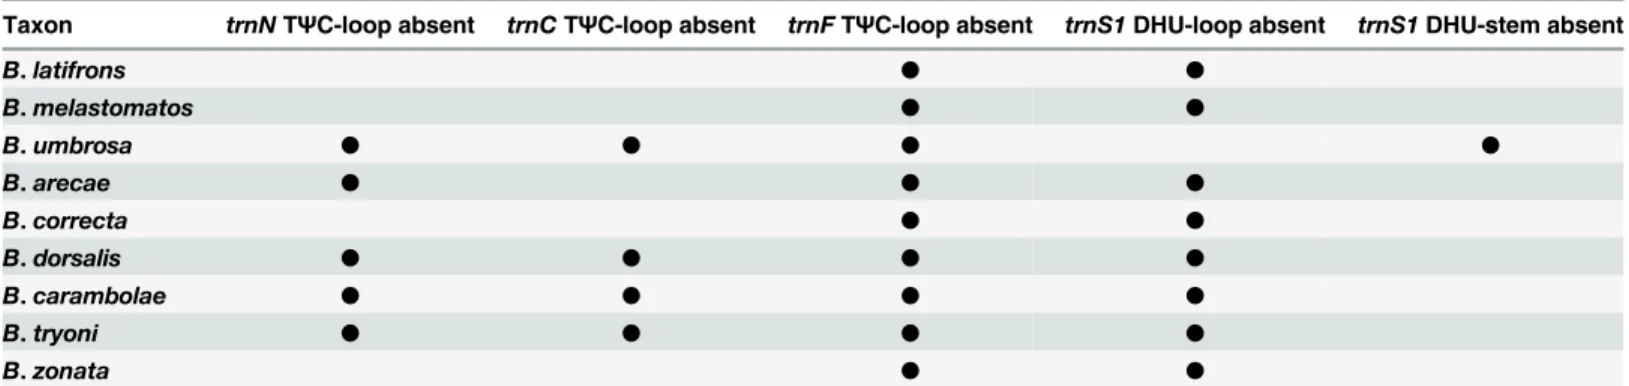 Table 4. Absence of T Ψ C-loop, DHU-loop and DHU-stem in the transfer RNAs of Bactrocera taxa of the subgenus Bactrocera.